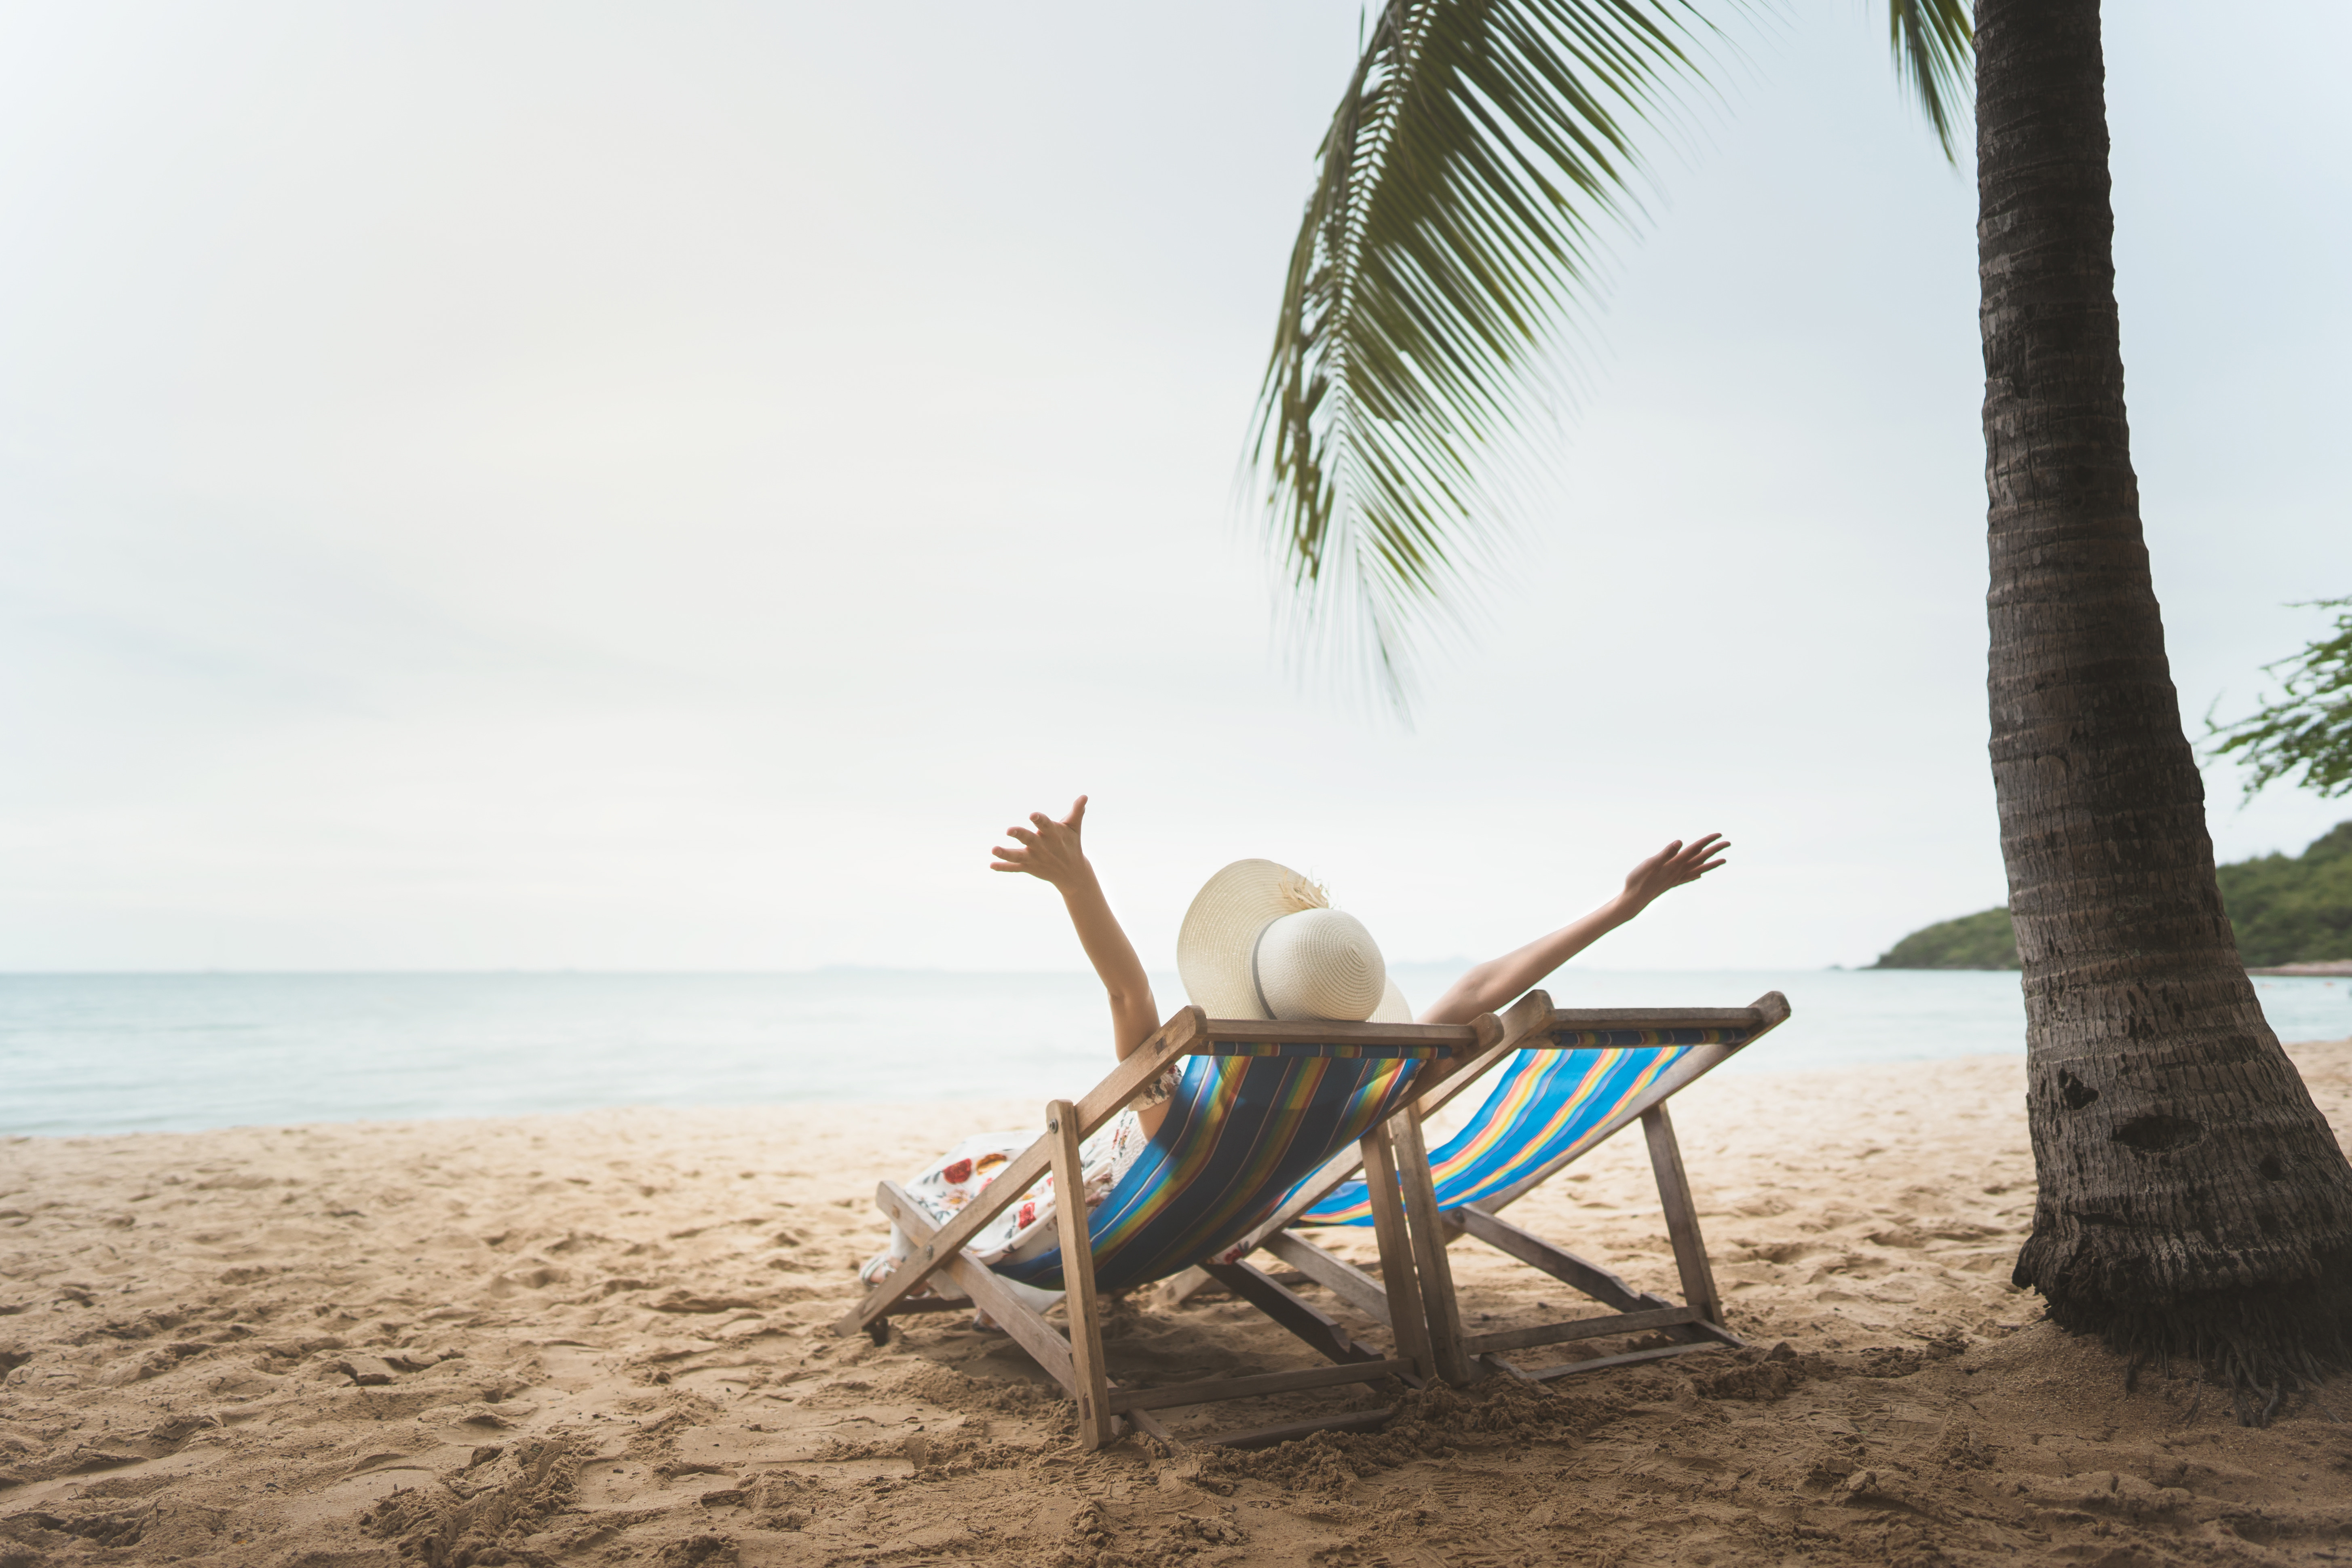 Summer with CBD: What are the benefits of using CBD during the summer months?